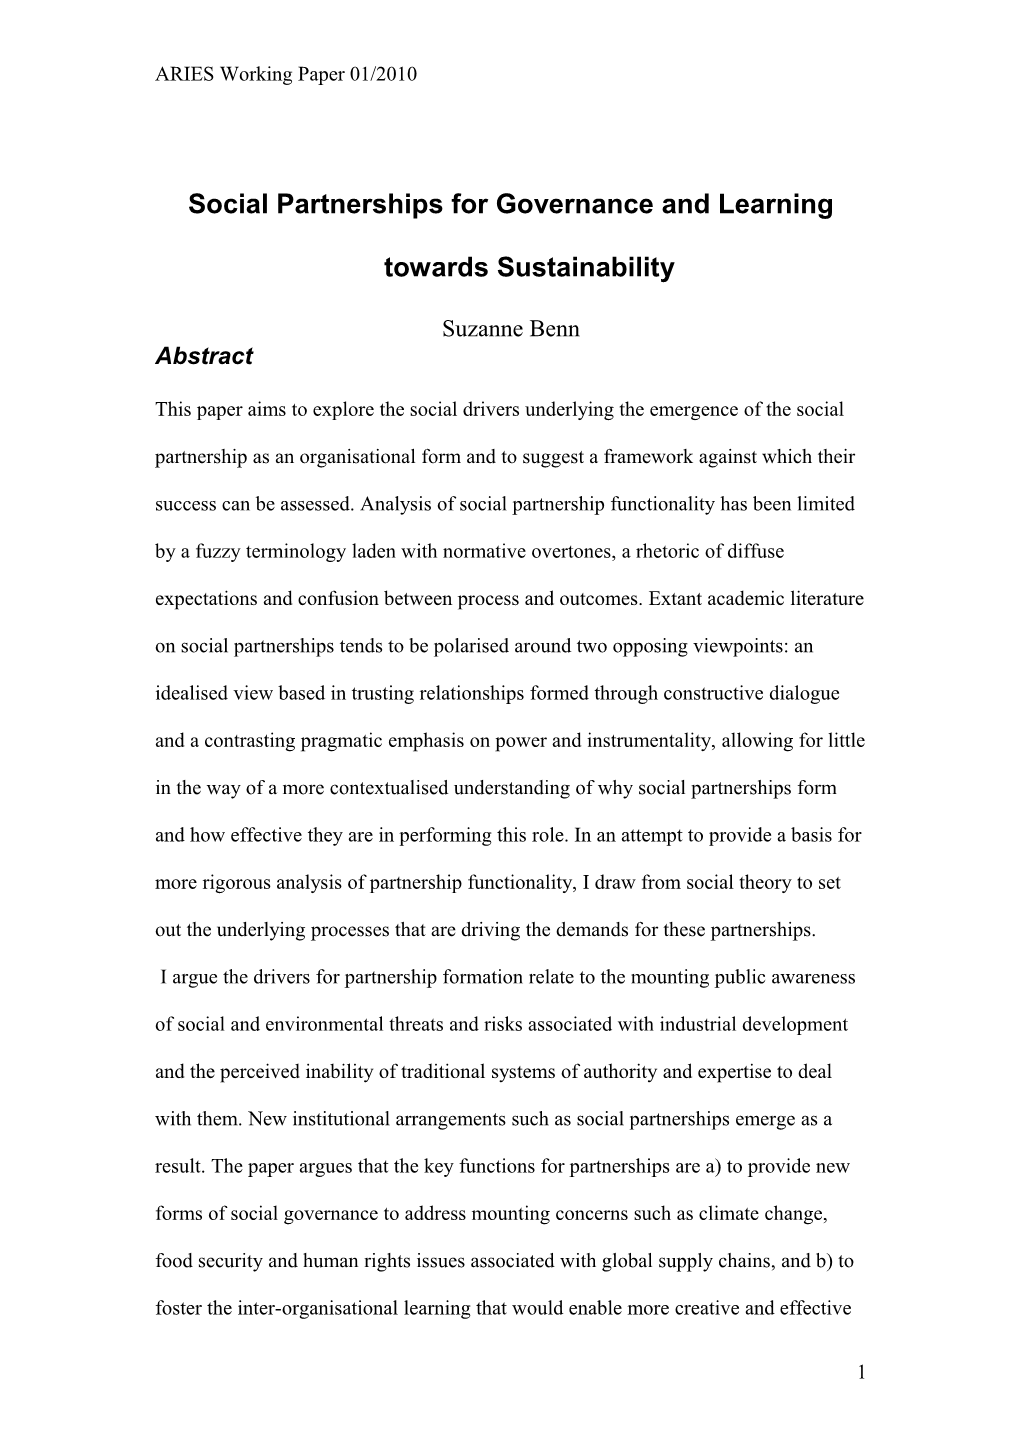 Social Partnerships for Governance and Learning Towards Sustainability